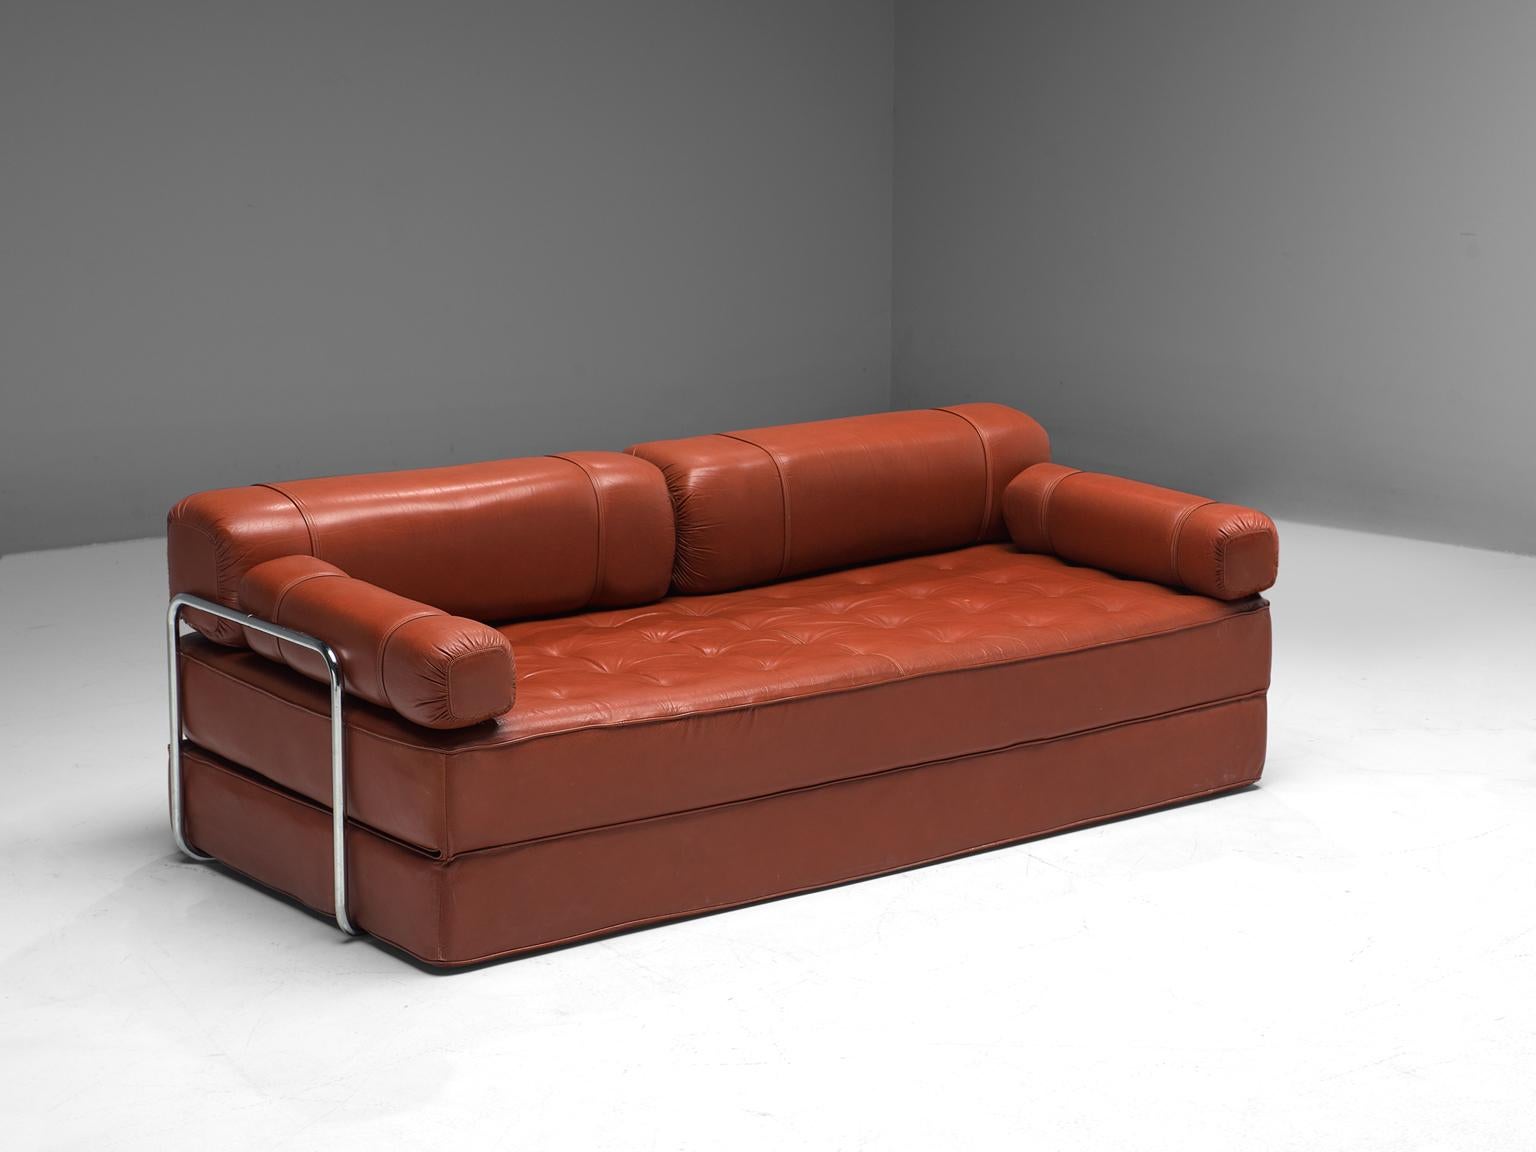 Sofa daybed, leather and chromed metal, Europe, 1970s.

This postmodern sofa is a versatile piece, since it can be unfolded into a bed as well. The seat consists of two mattress covered with beautiful dark red leather. The chromed tubular frame